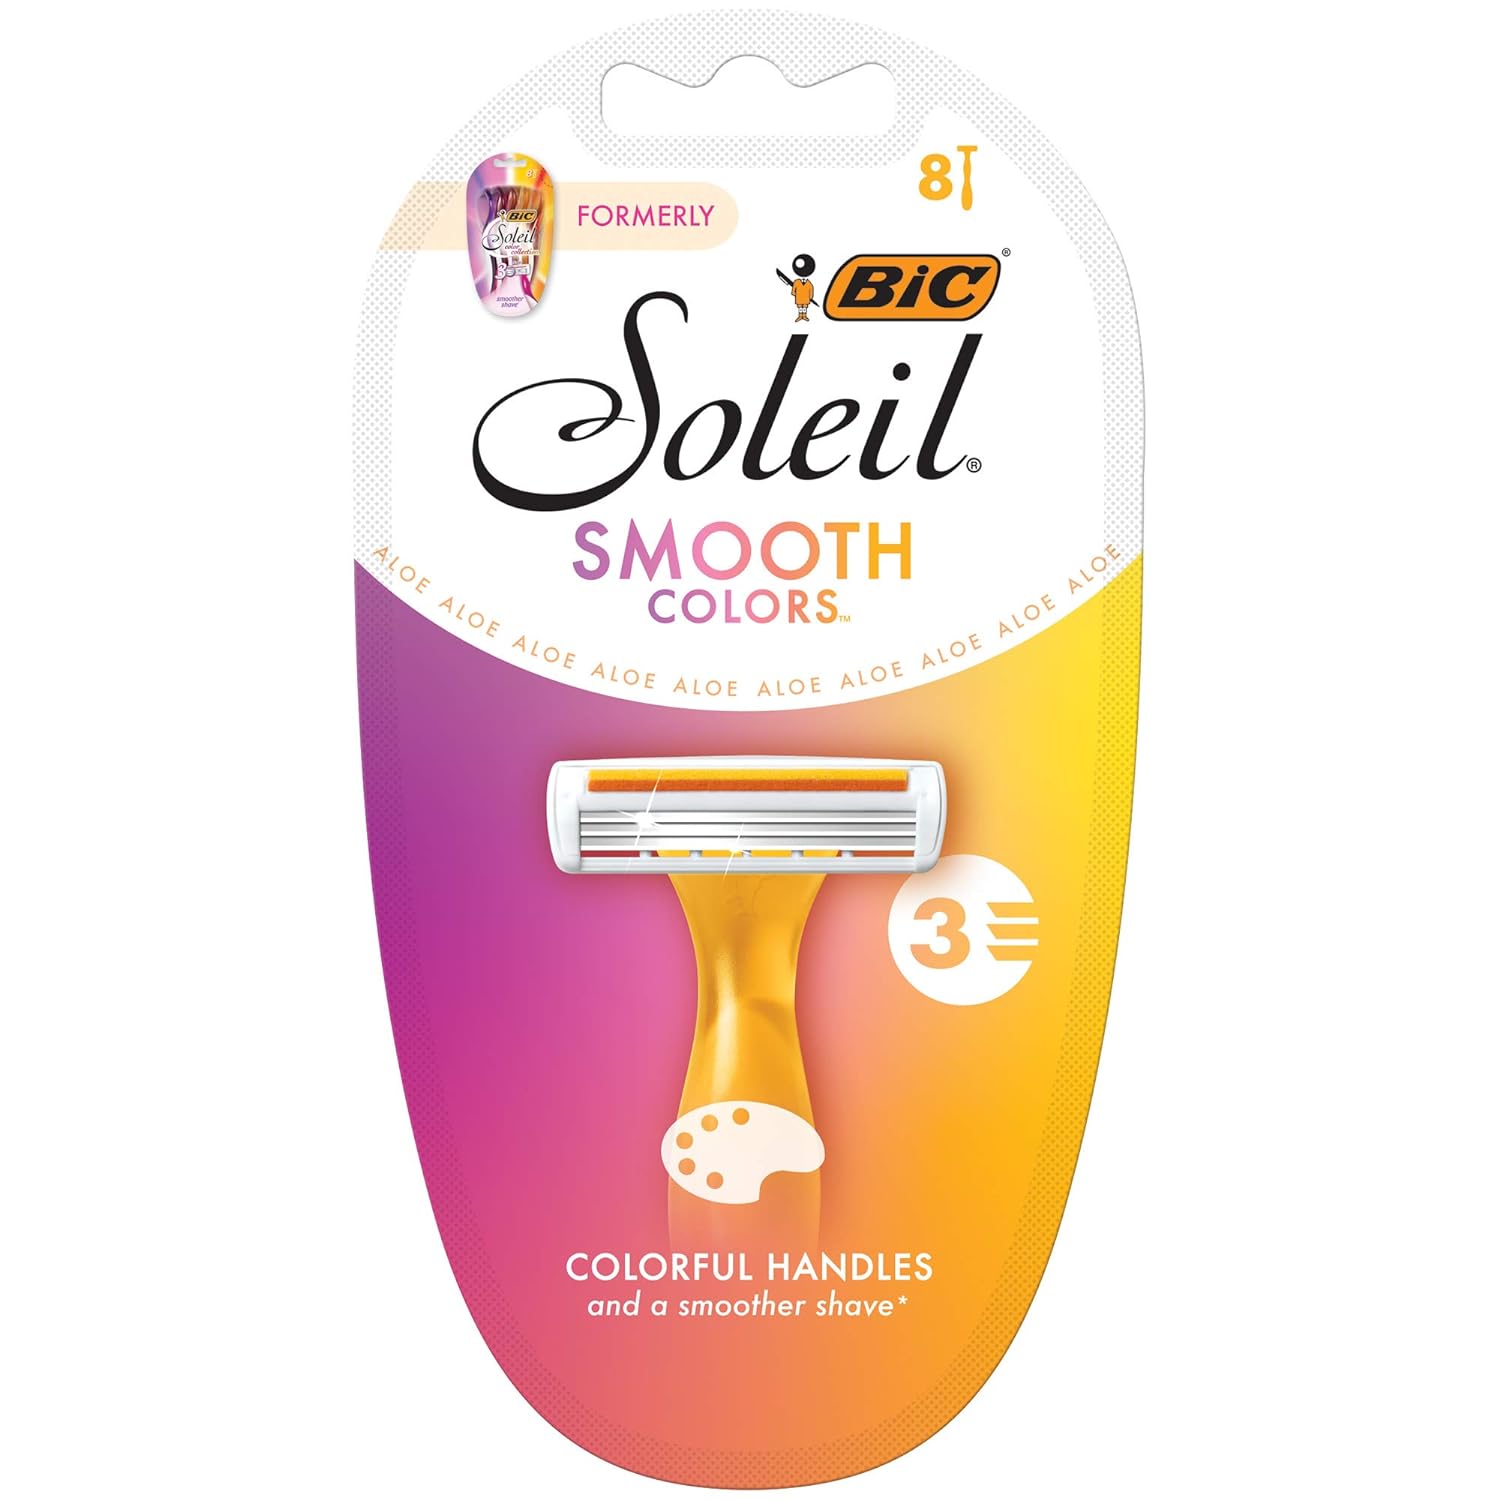 BIC Soleil SMOOTH COLORS Disposable Razors for Women Sensitive Skin Razor With Aloe Vera and Vitamin E Lubricating Strip and 3 Blades, 8 Piece Razor Set